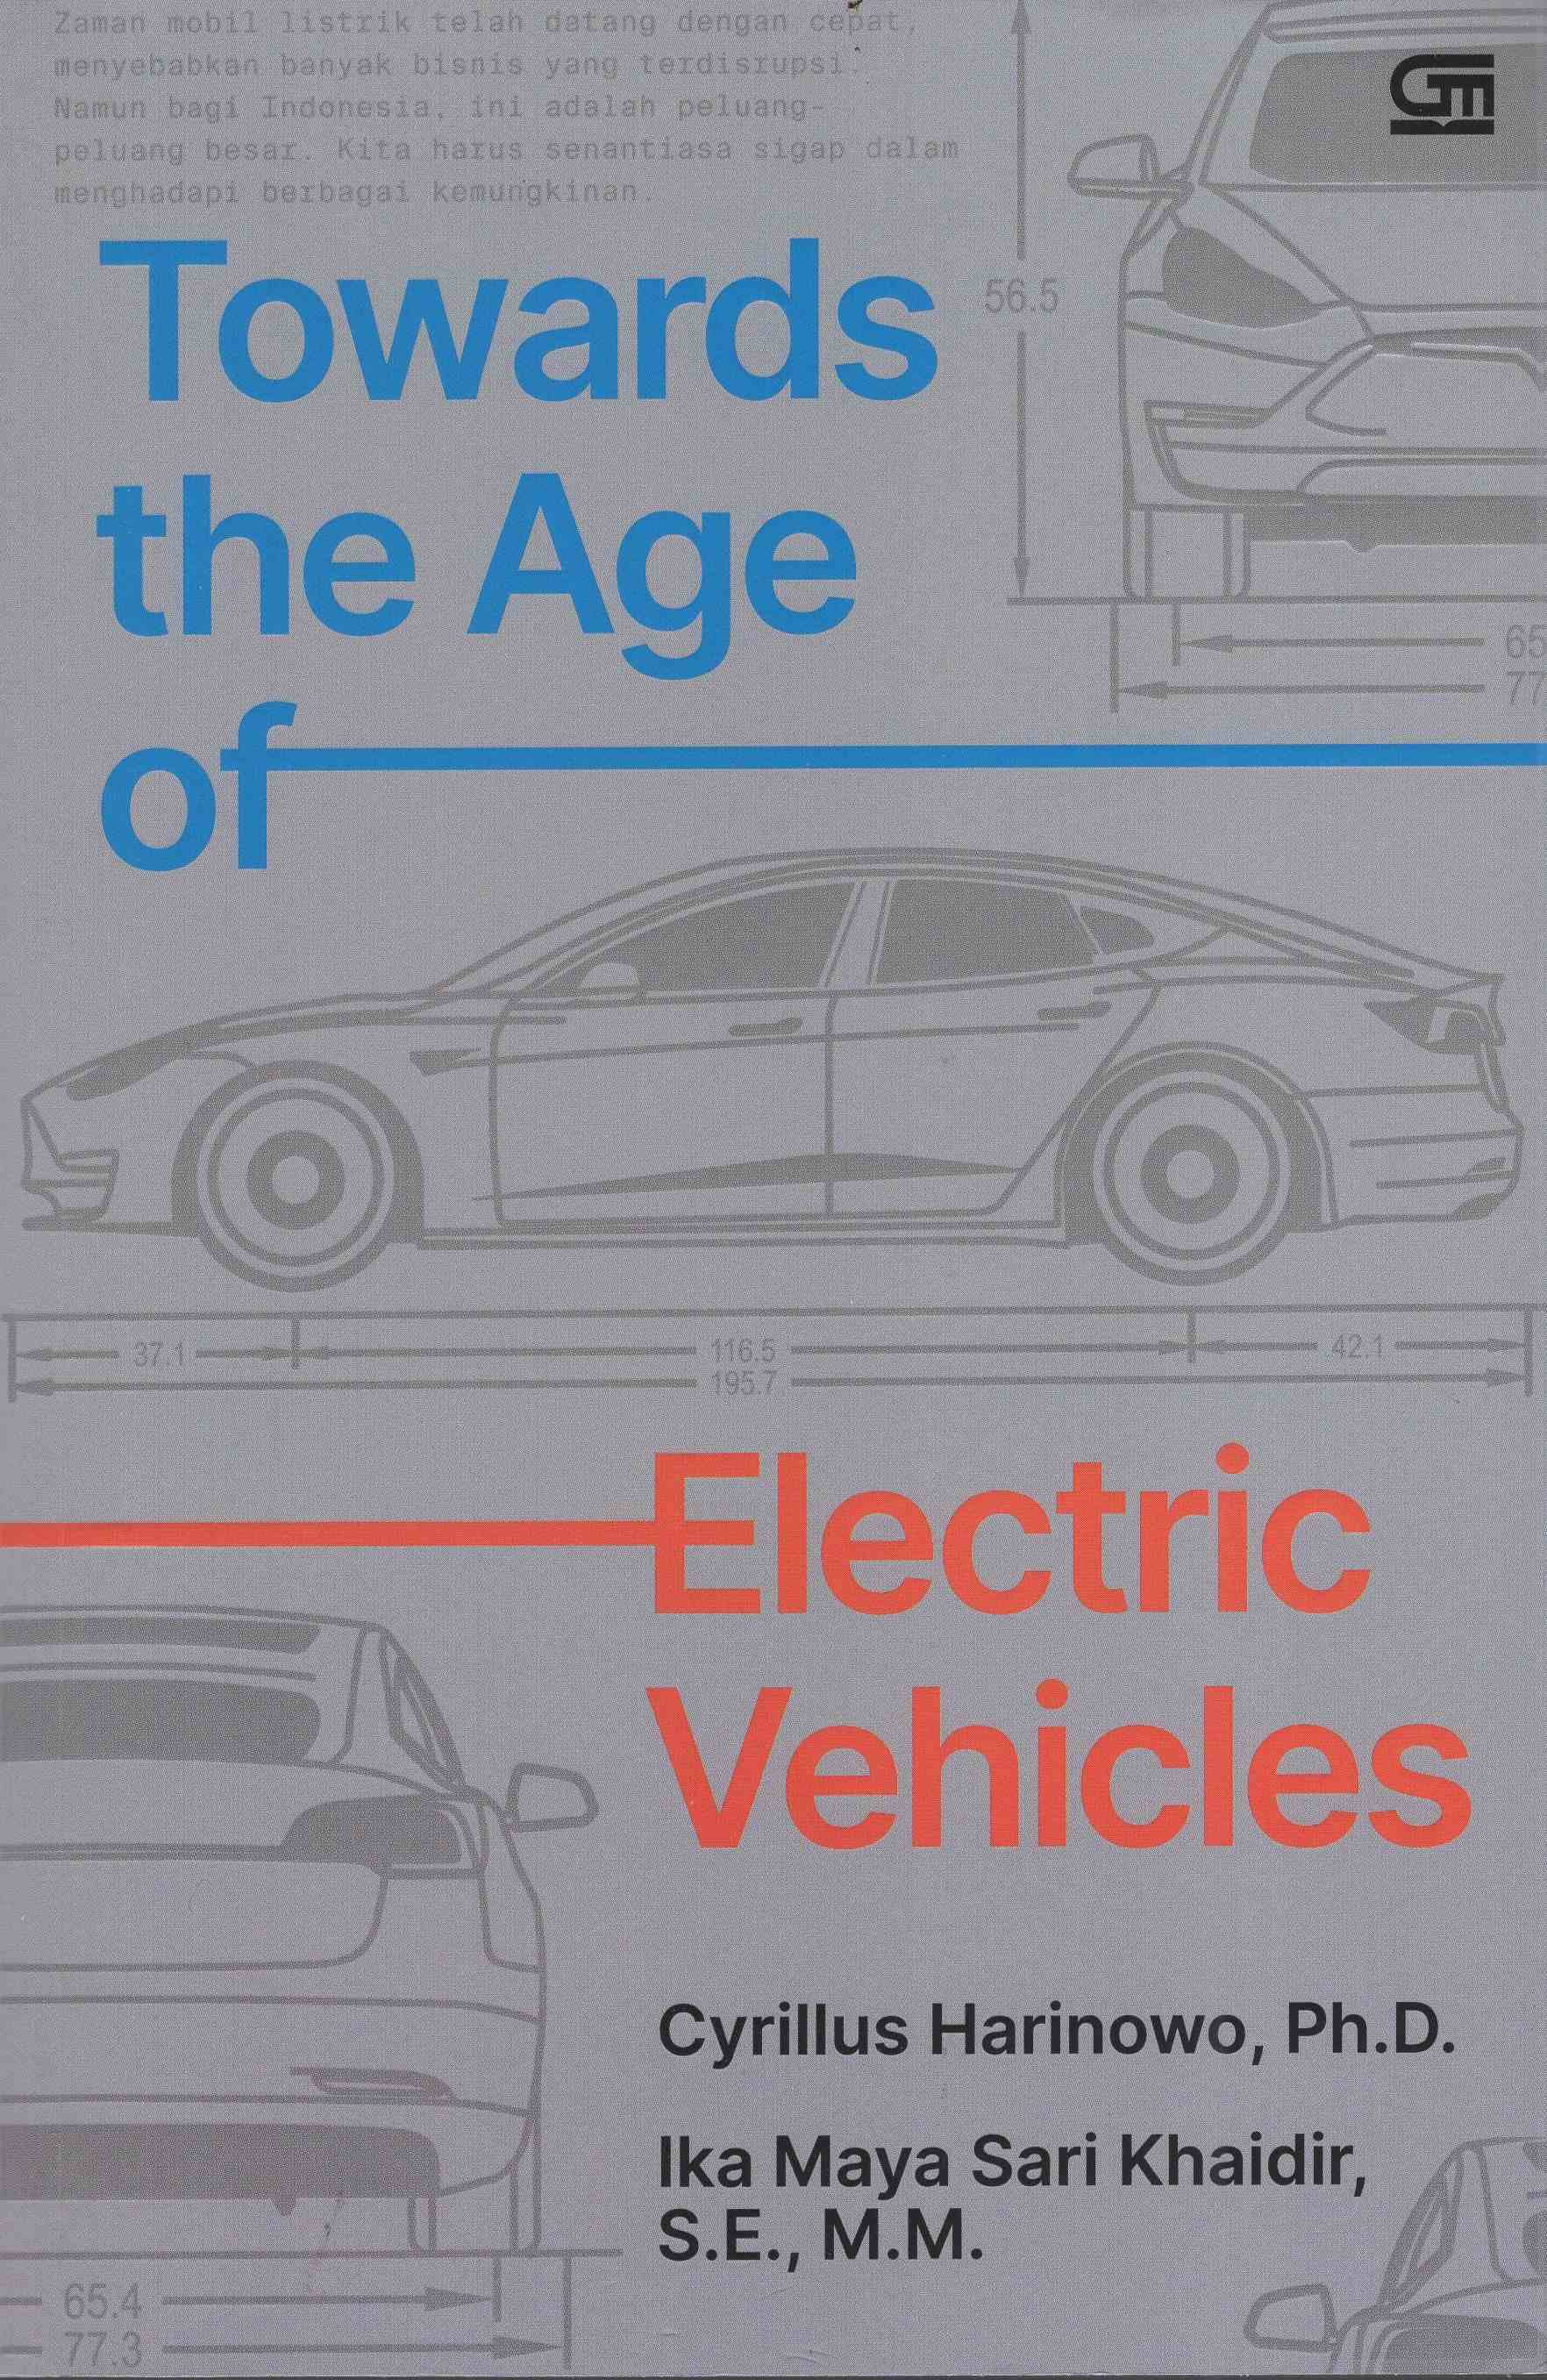 Towards the Age of Electric Vehicles